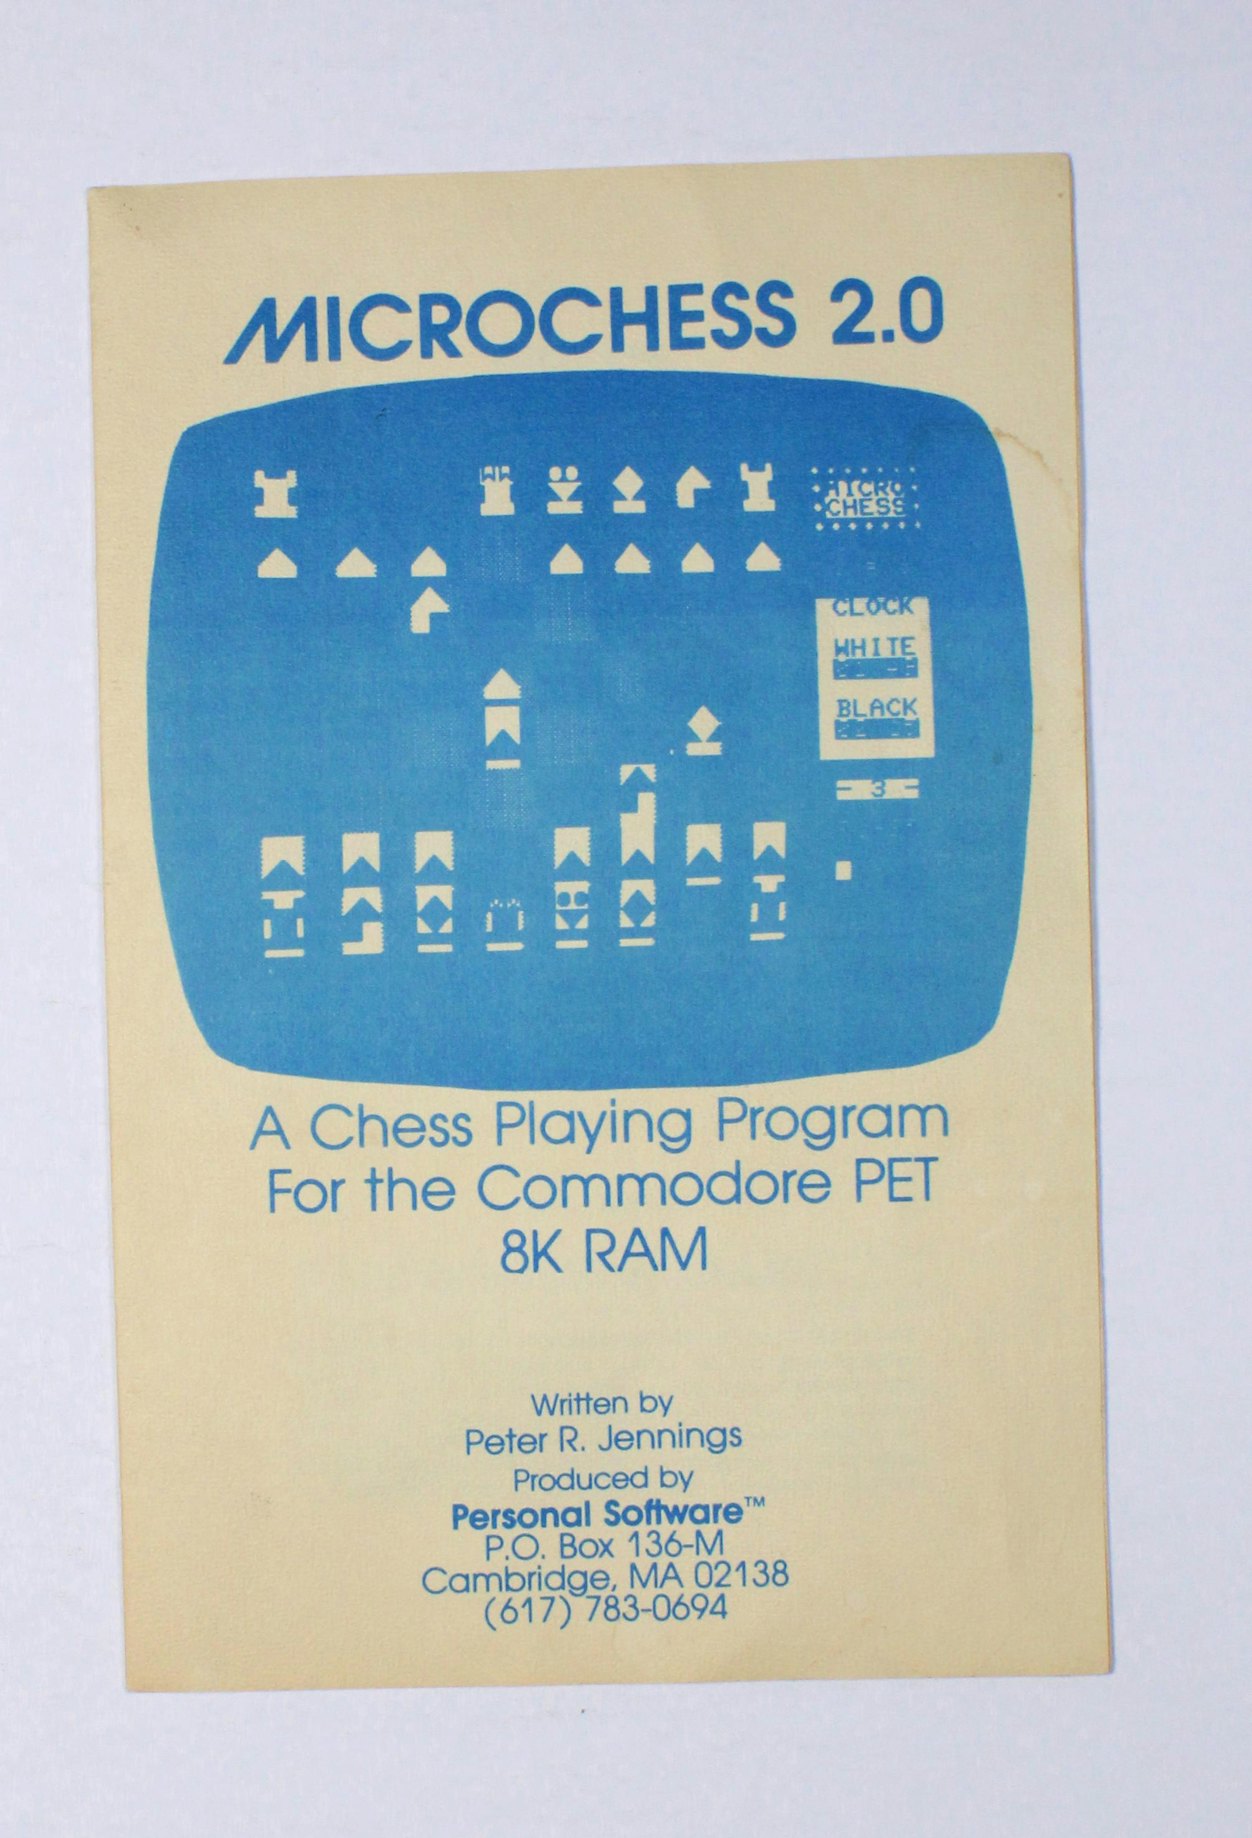 Microchess 2.0: A chess playing program for the Commodore PET 8K RAM